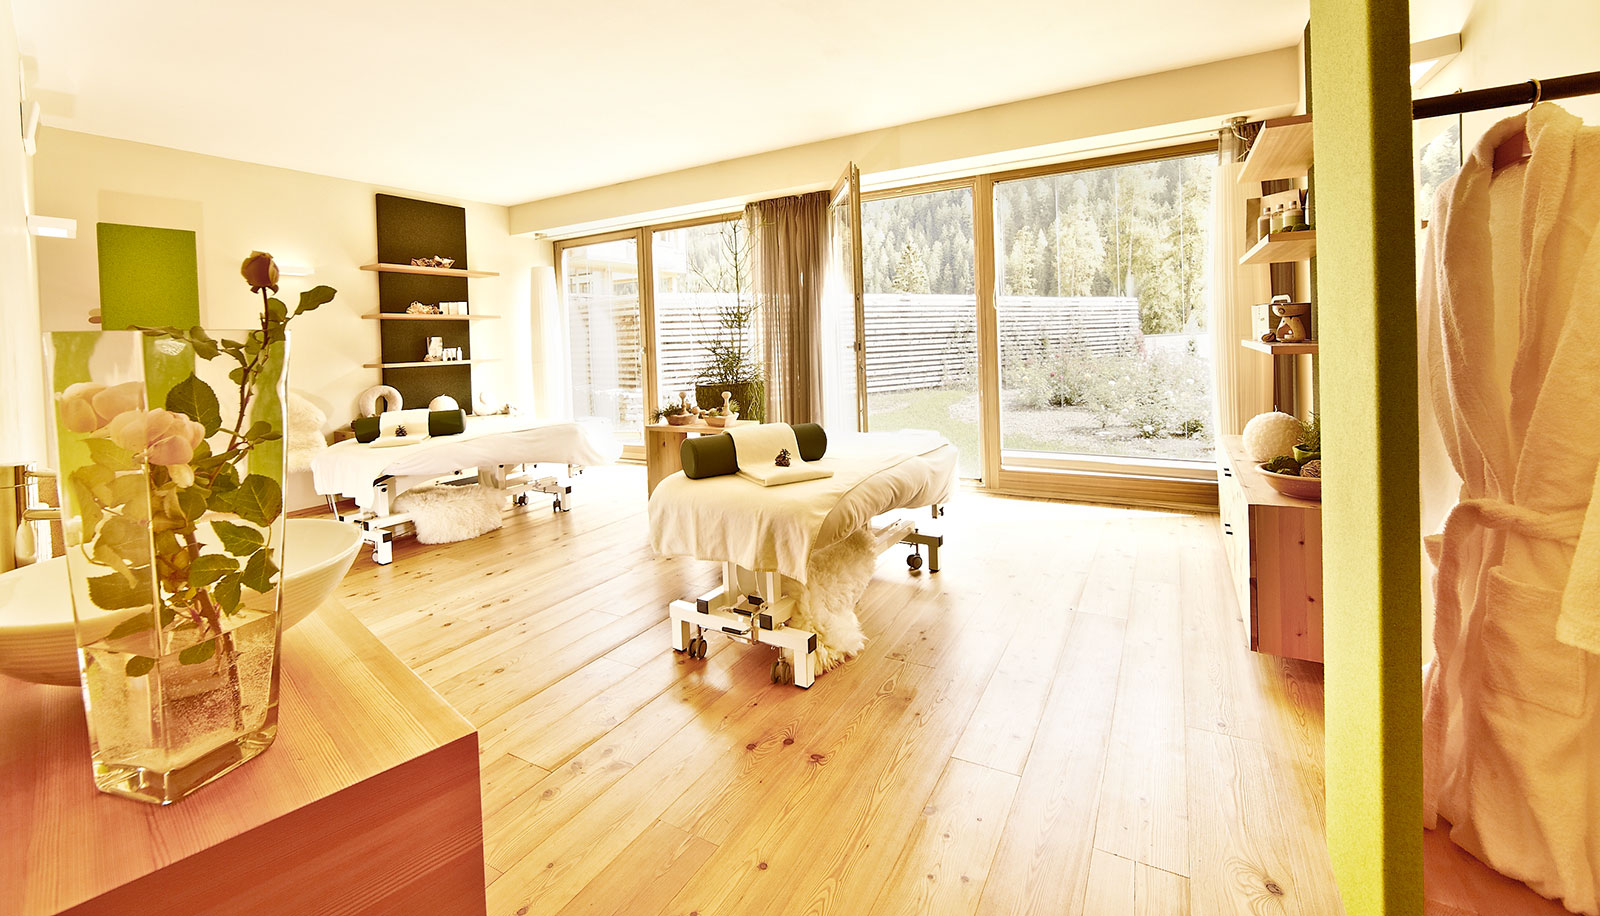 Treatment room of Arosea Hotel in Ultental-Val d'Ultimo with massage bed, wooden floor and view of the garden